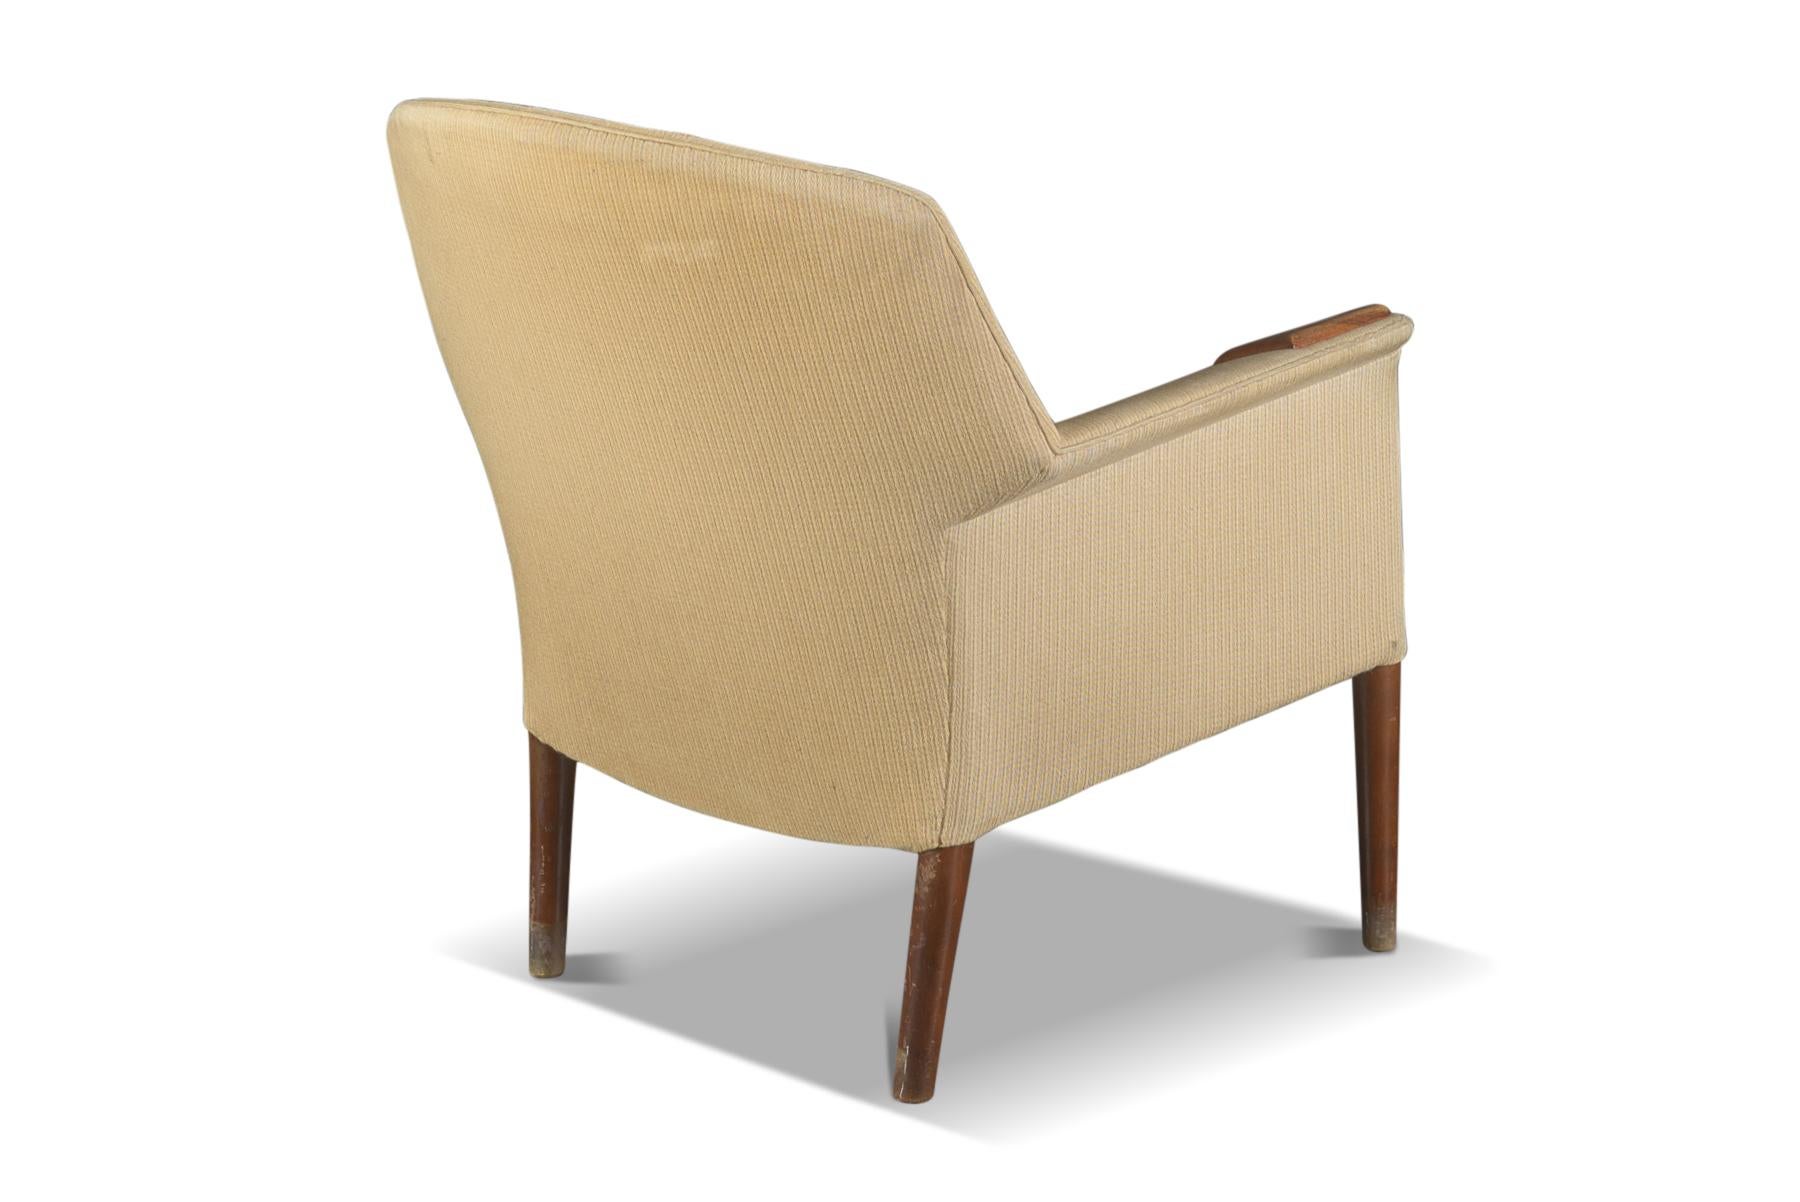 Origin: Denmark
Designer: Unknown
Manufacturer: Fritz Hansen
Era: 1950s
Materials: Teak, wool
Measurements: 28.25? wide x 32.25? tall

Condition:
Frames in excellent condition. Wool has vintage wear. Price includes new upholstery in your